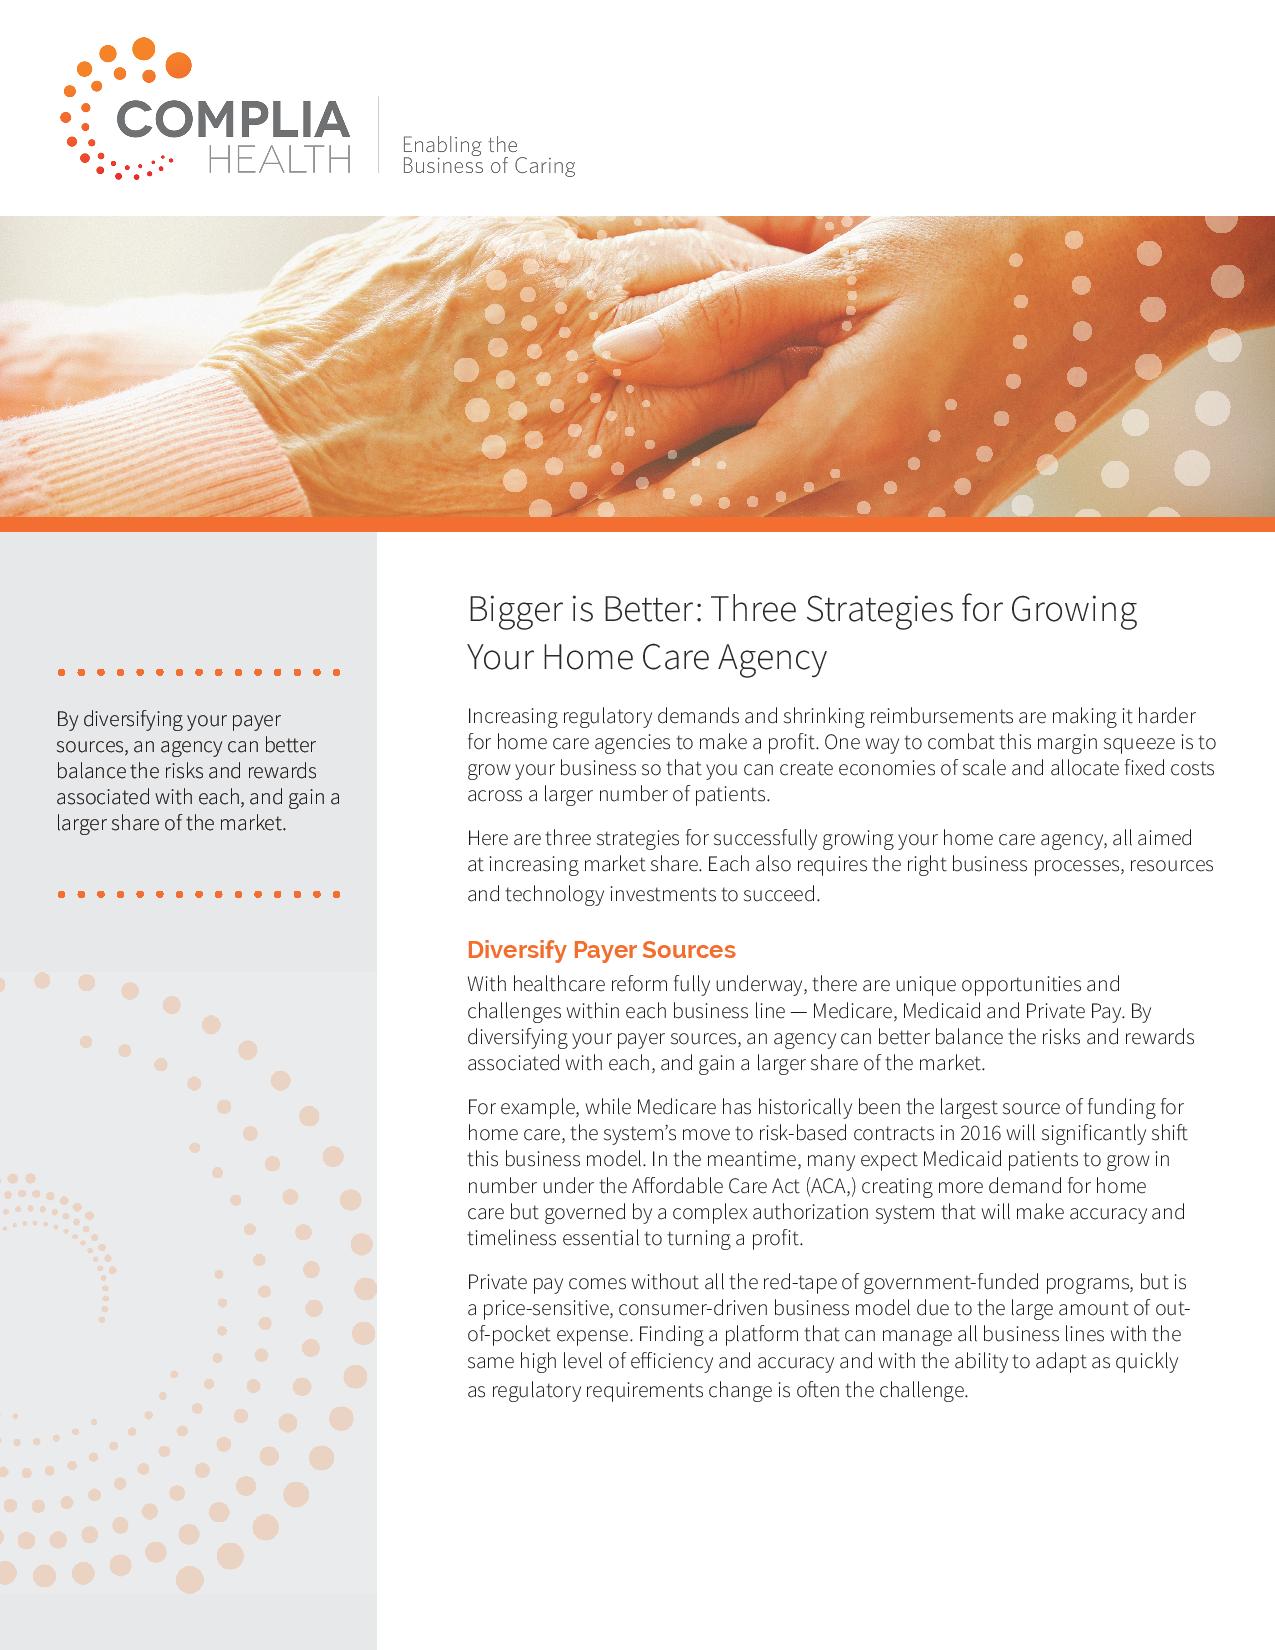 Bigger is Better - 3 Strategies for Growing Your Home Care Agency-page-001.jpg